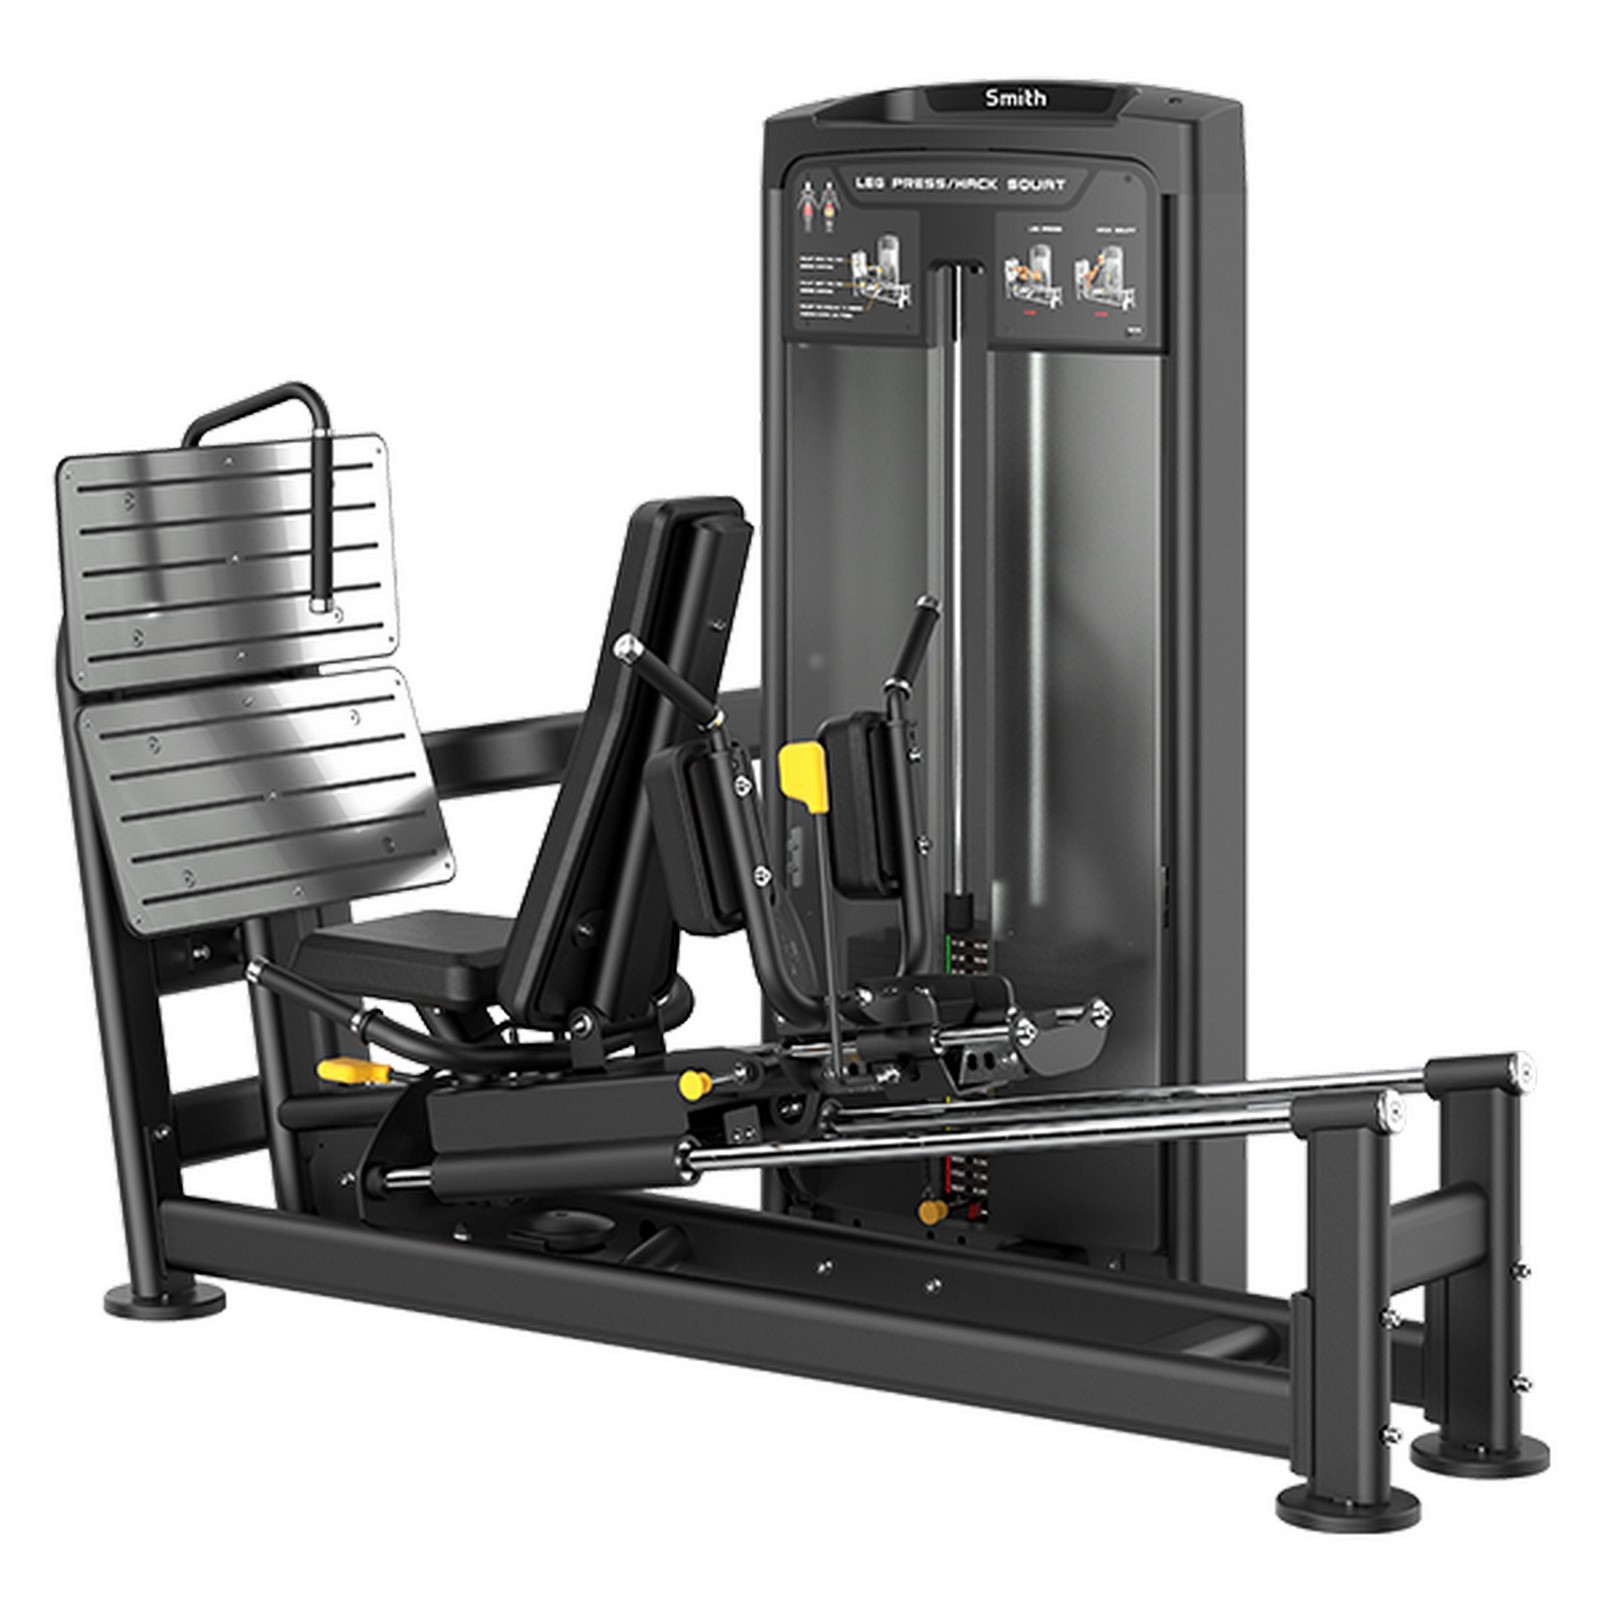   \ Smith Fitness RE8016  147, 5